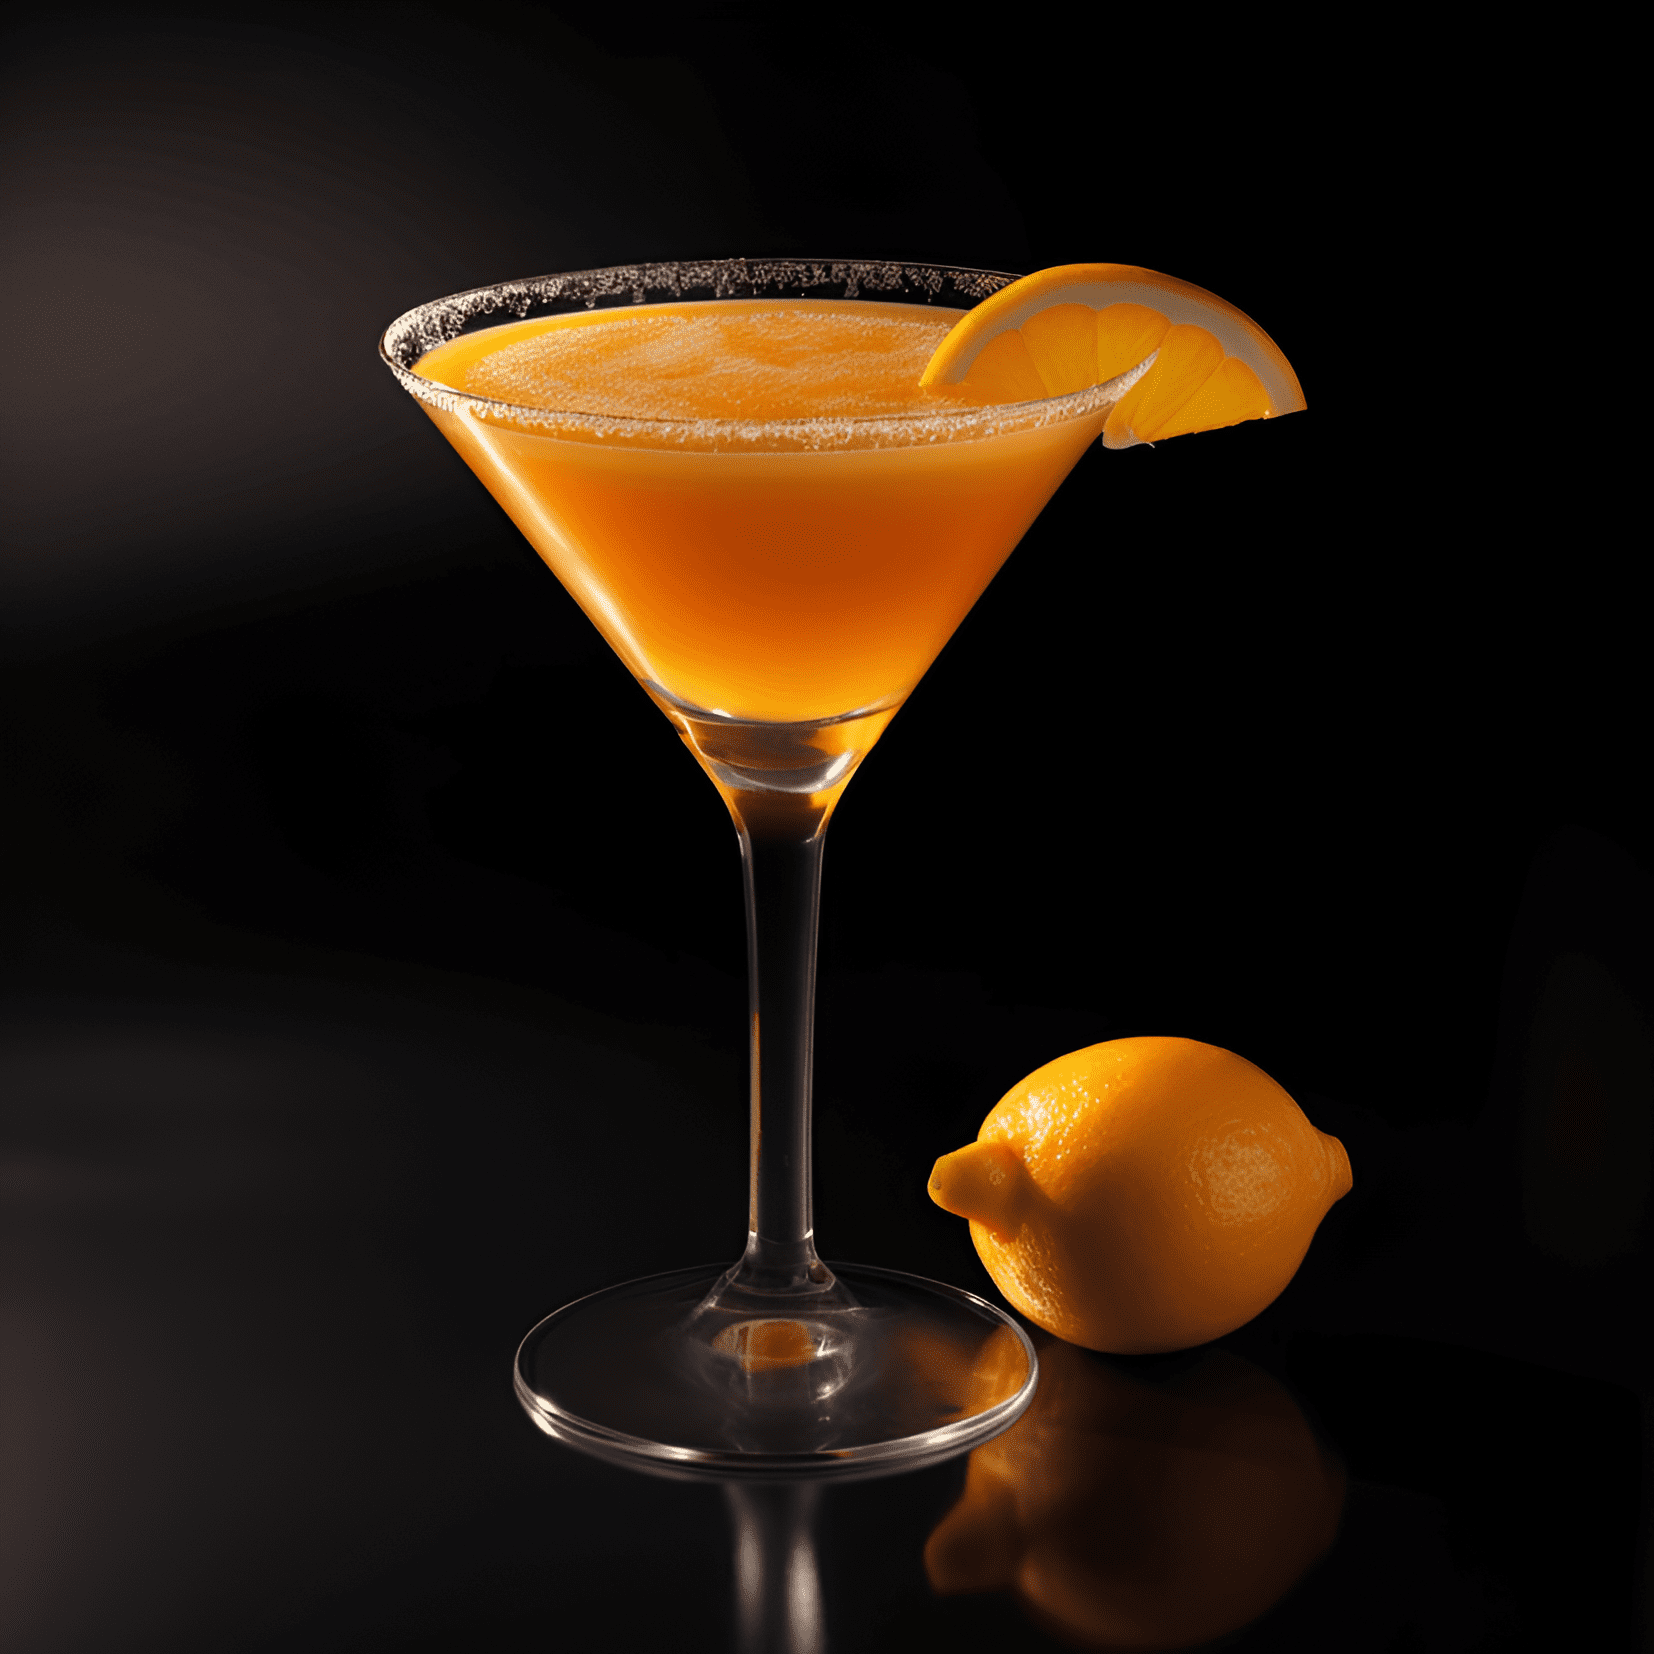 Mandarin Cocktail Recipe - The Mandarin cocktail is a harmonious blend of sweet, tangy, and slightly bitter flavors. The sweetness of the Mandarin orange is perfectly balanced by the tartness of the lemon juice and the subtle bitterness of the orange liqueur. The overall taste is refreshing, light, and invigorating.